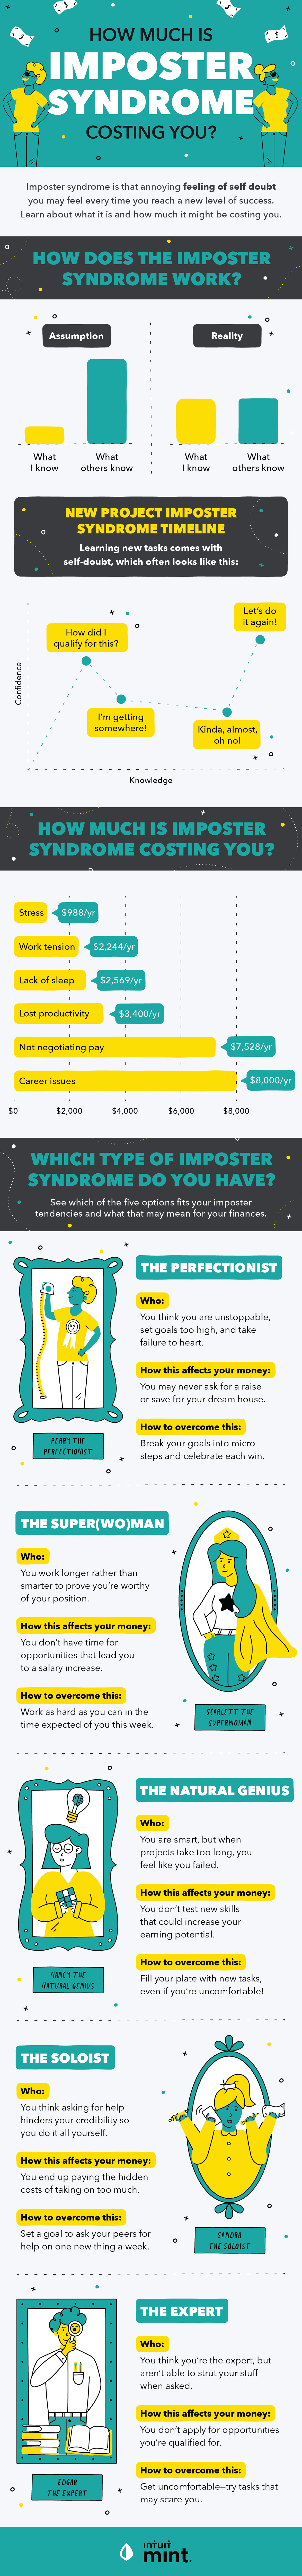 How much is imposter syndrome costing you?